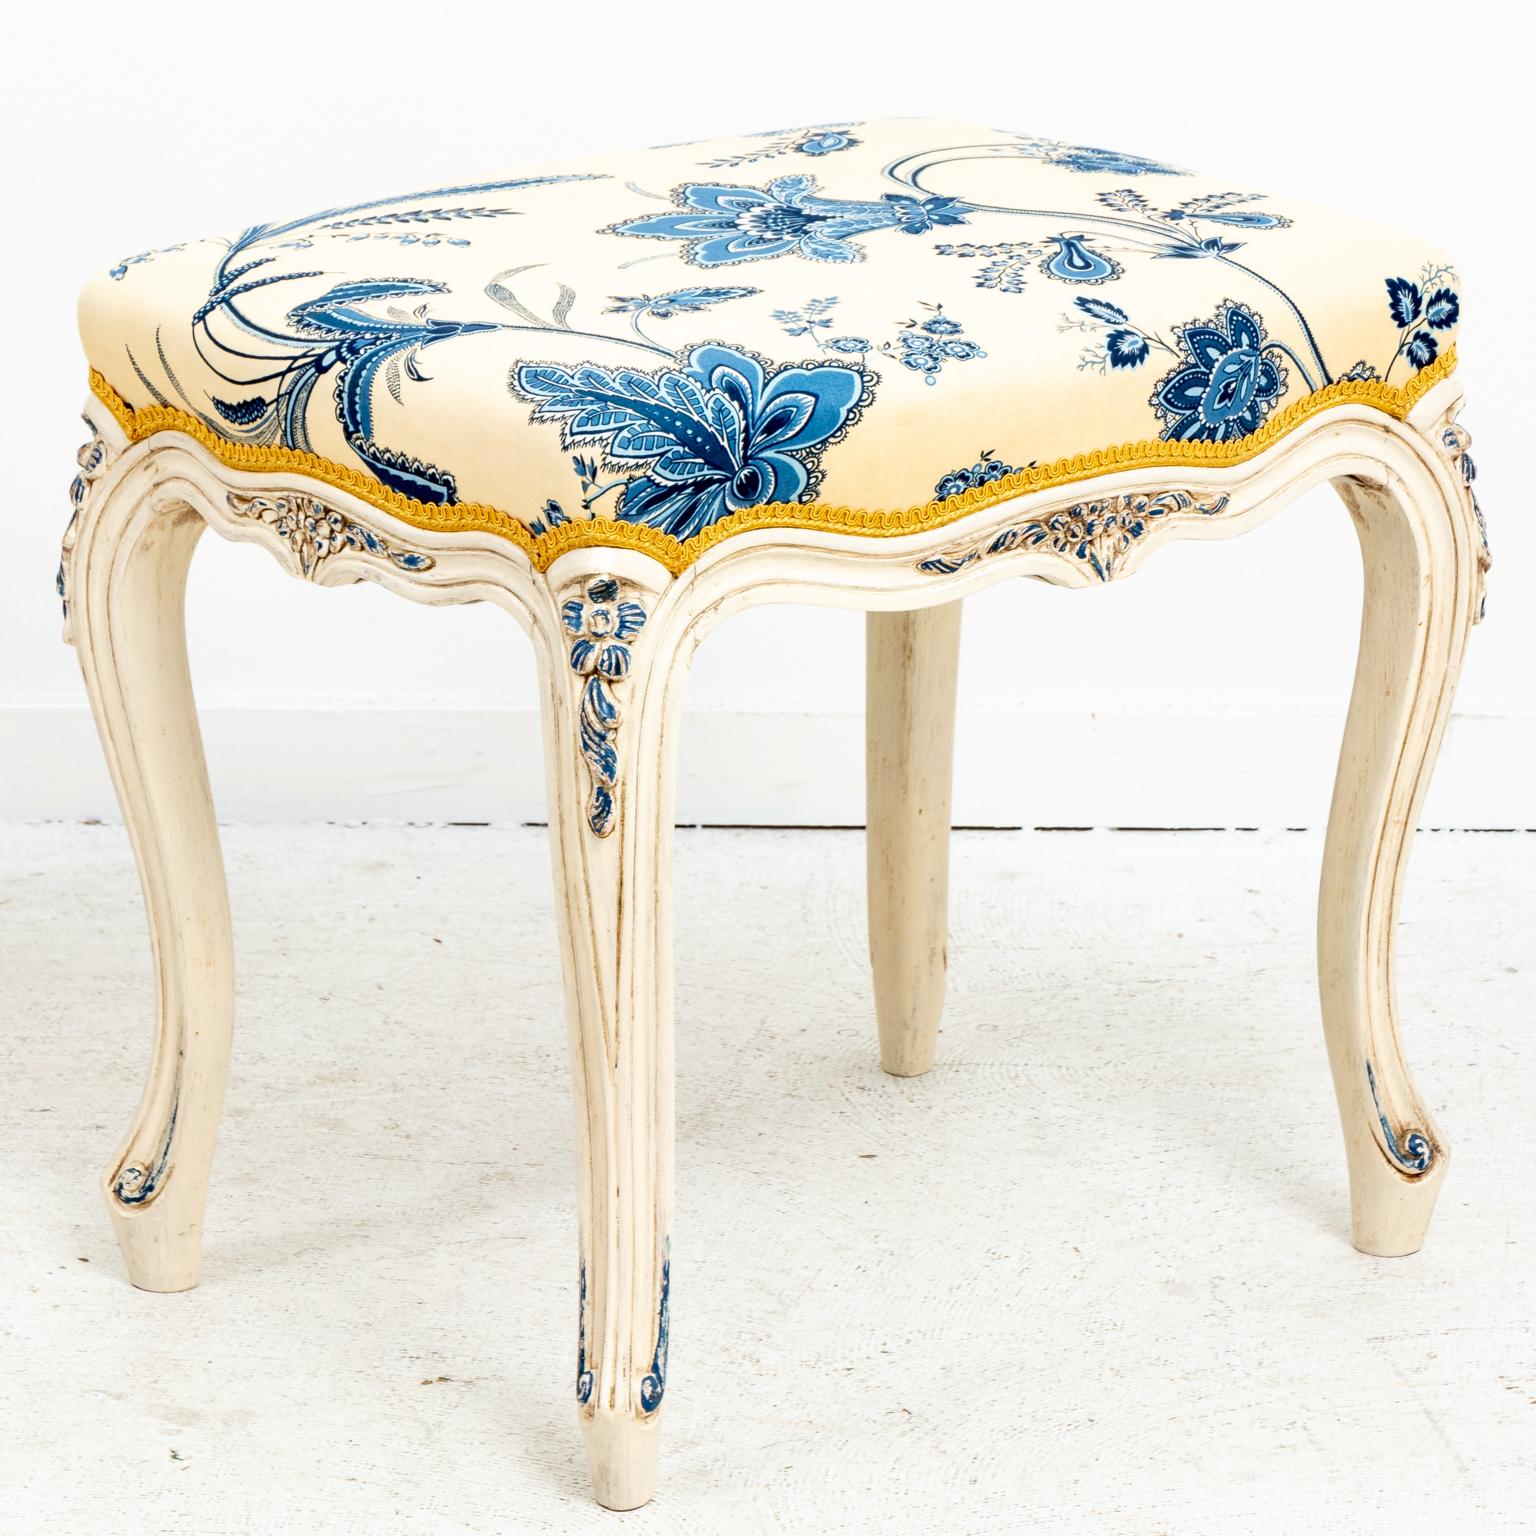 Hand-Painted Pair of Painted French Style Benches